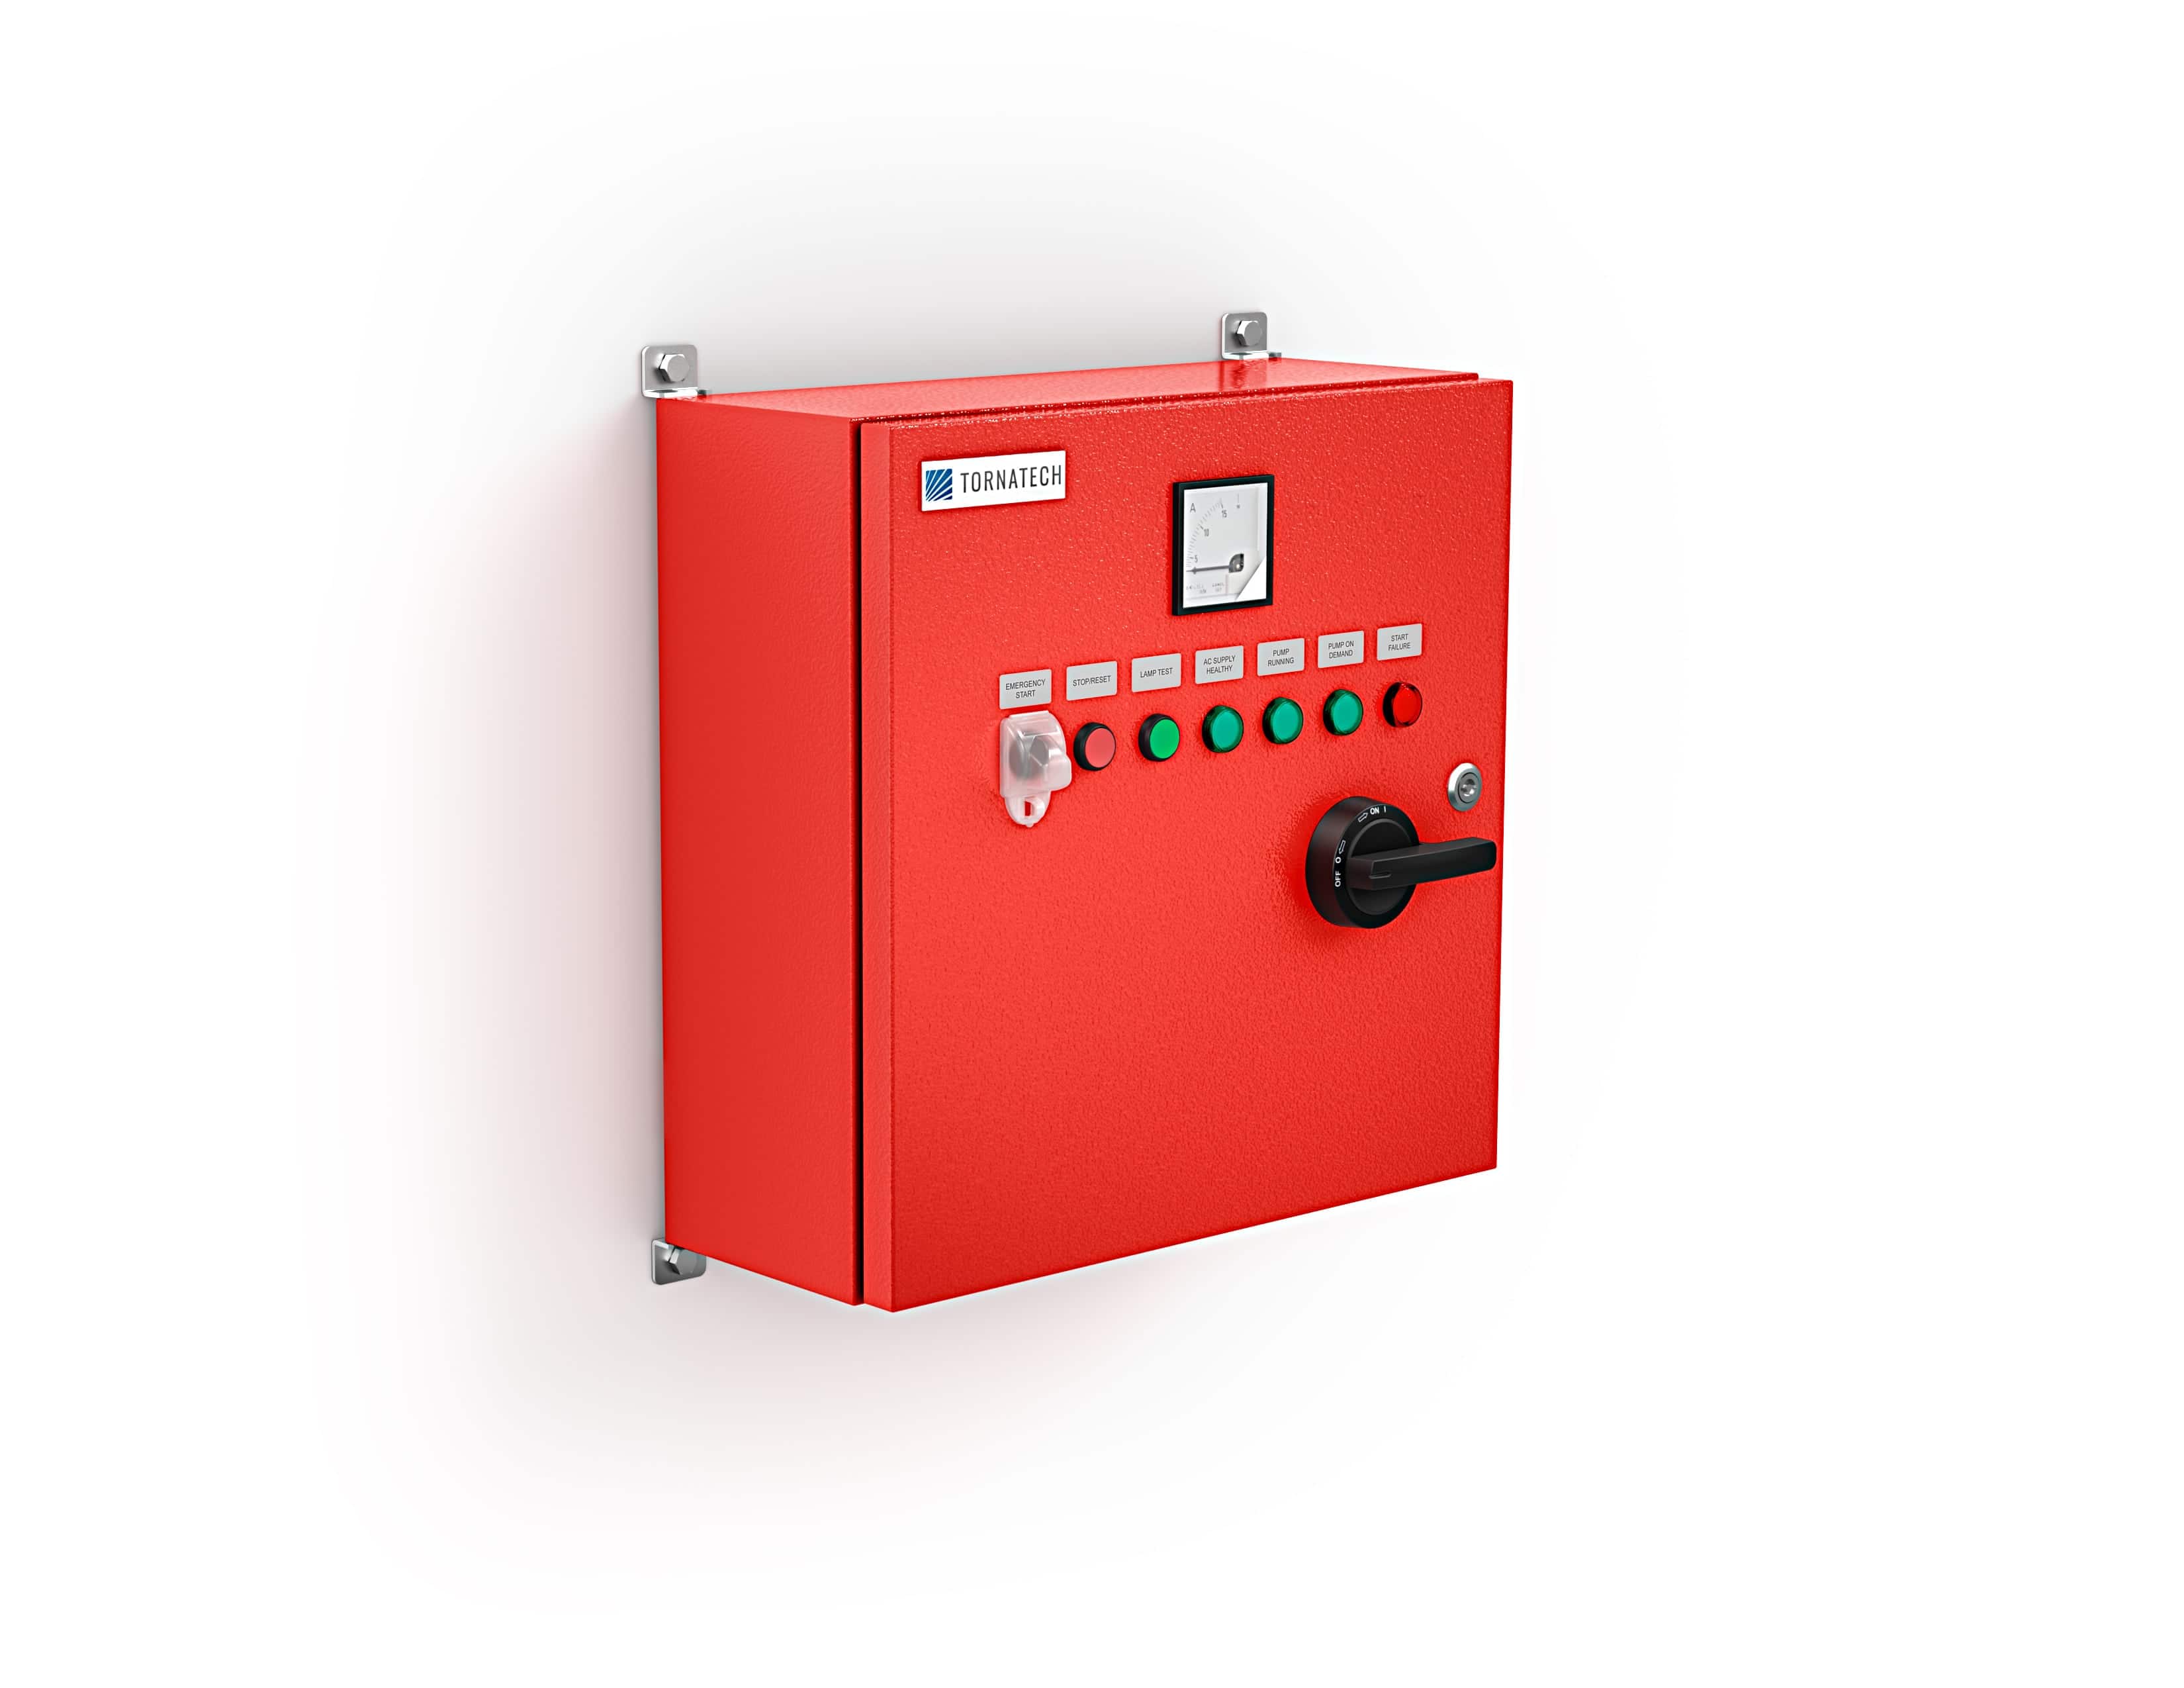 LFY - Electric fire pump controller